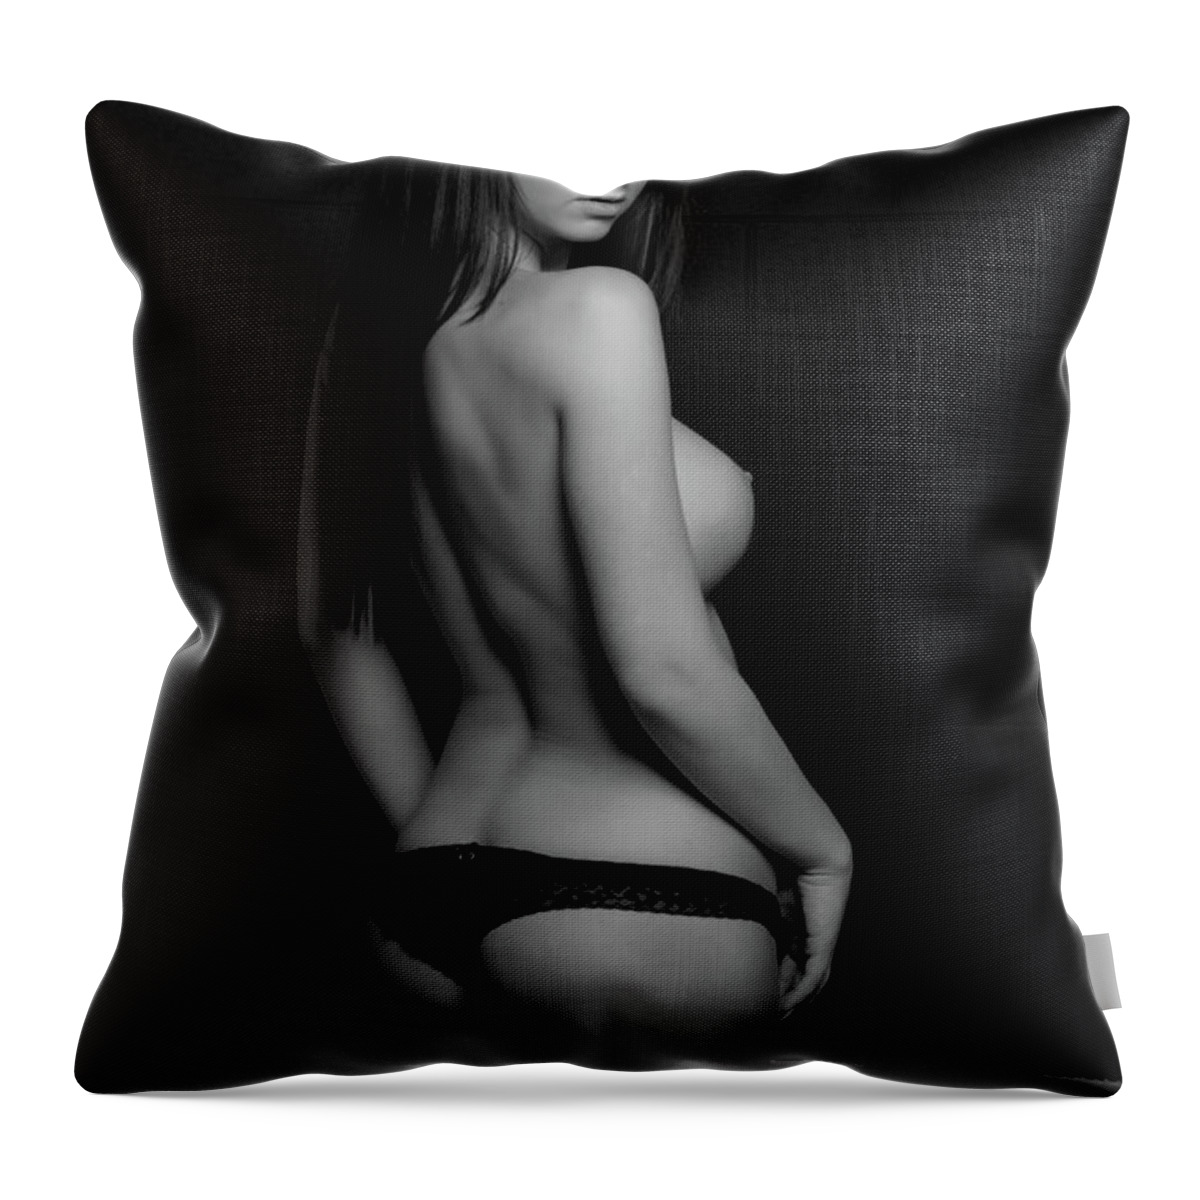 Lingerie Throw Pillow featuring the photograph Sweater And Heels #8 by La Bella Vita Boudoir